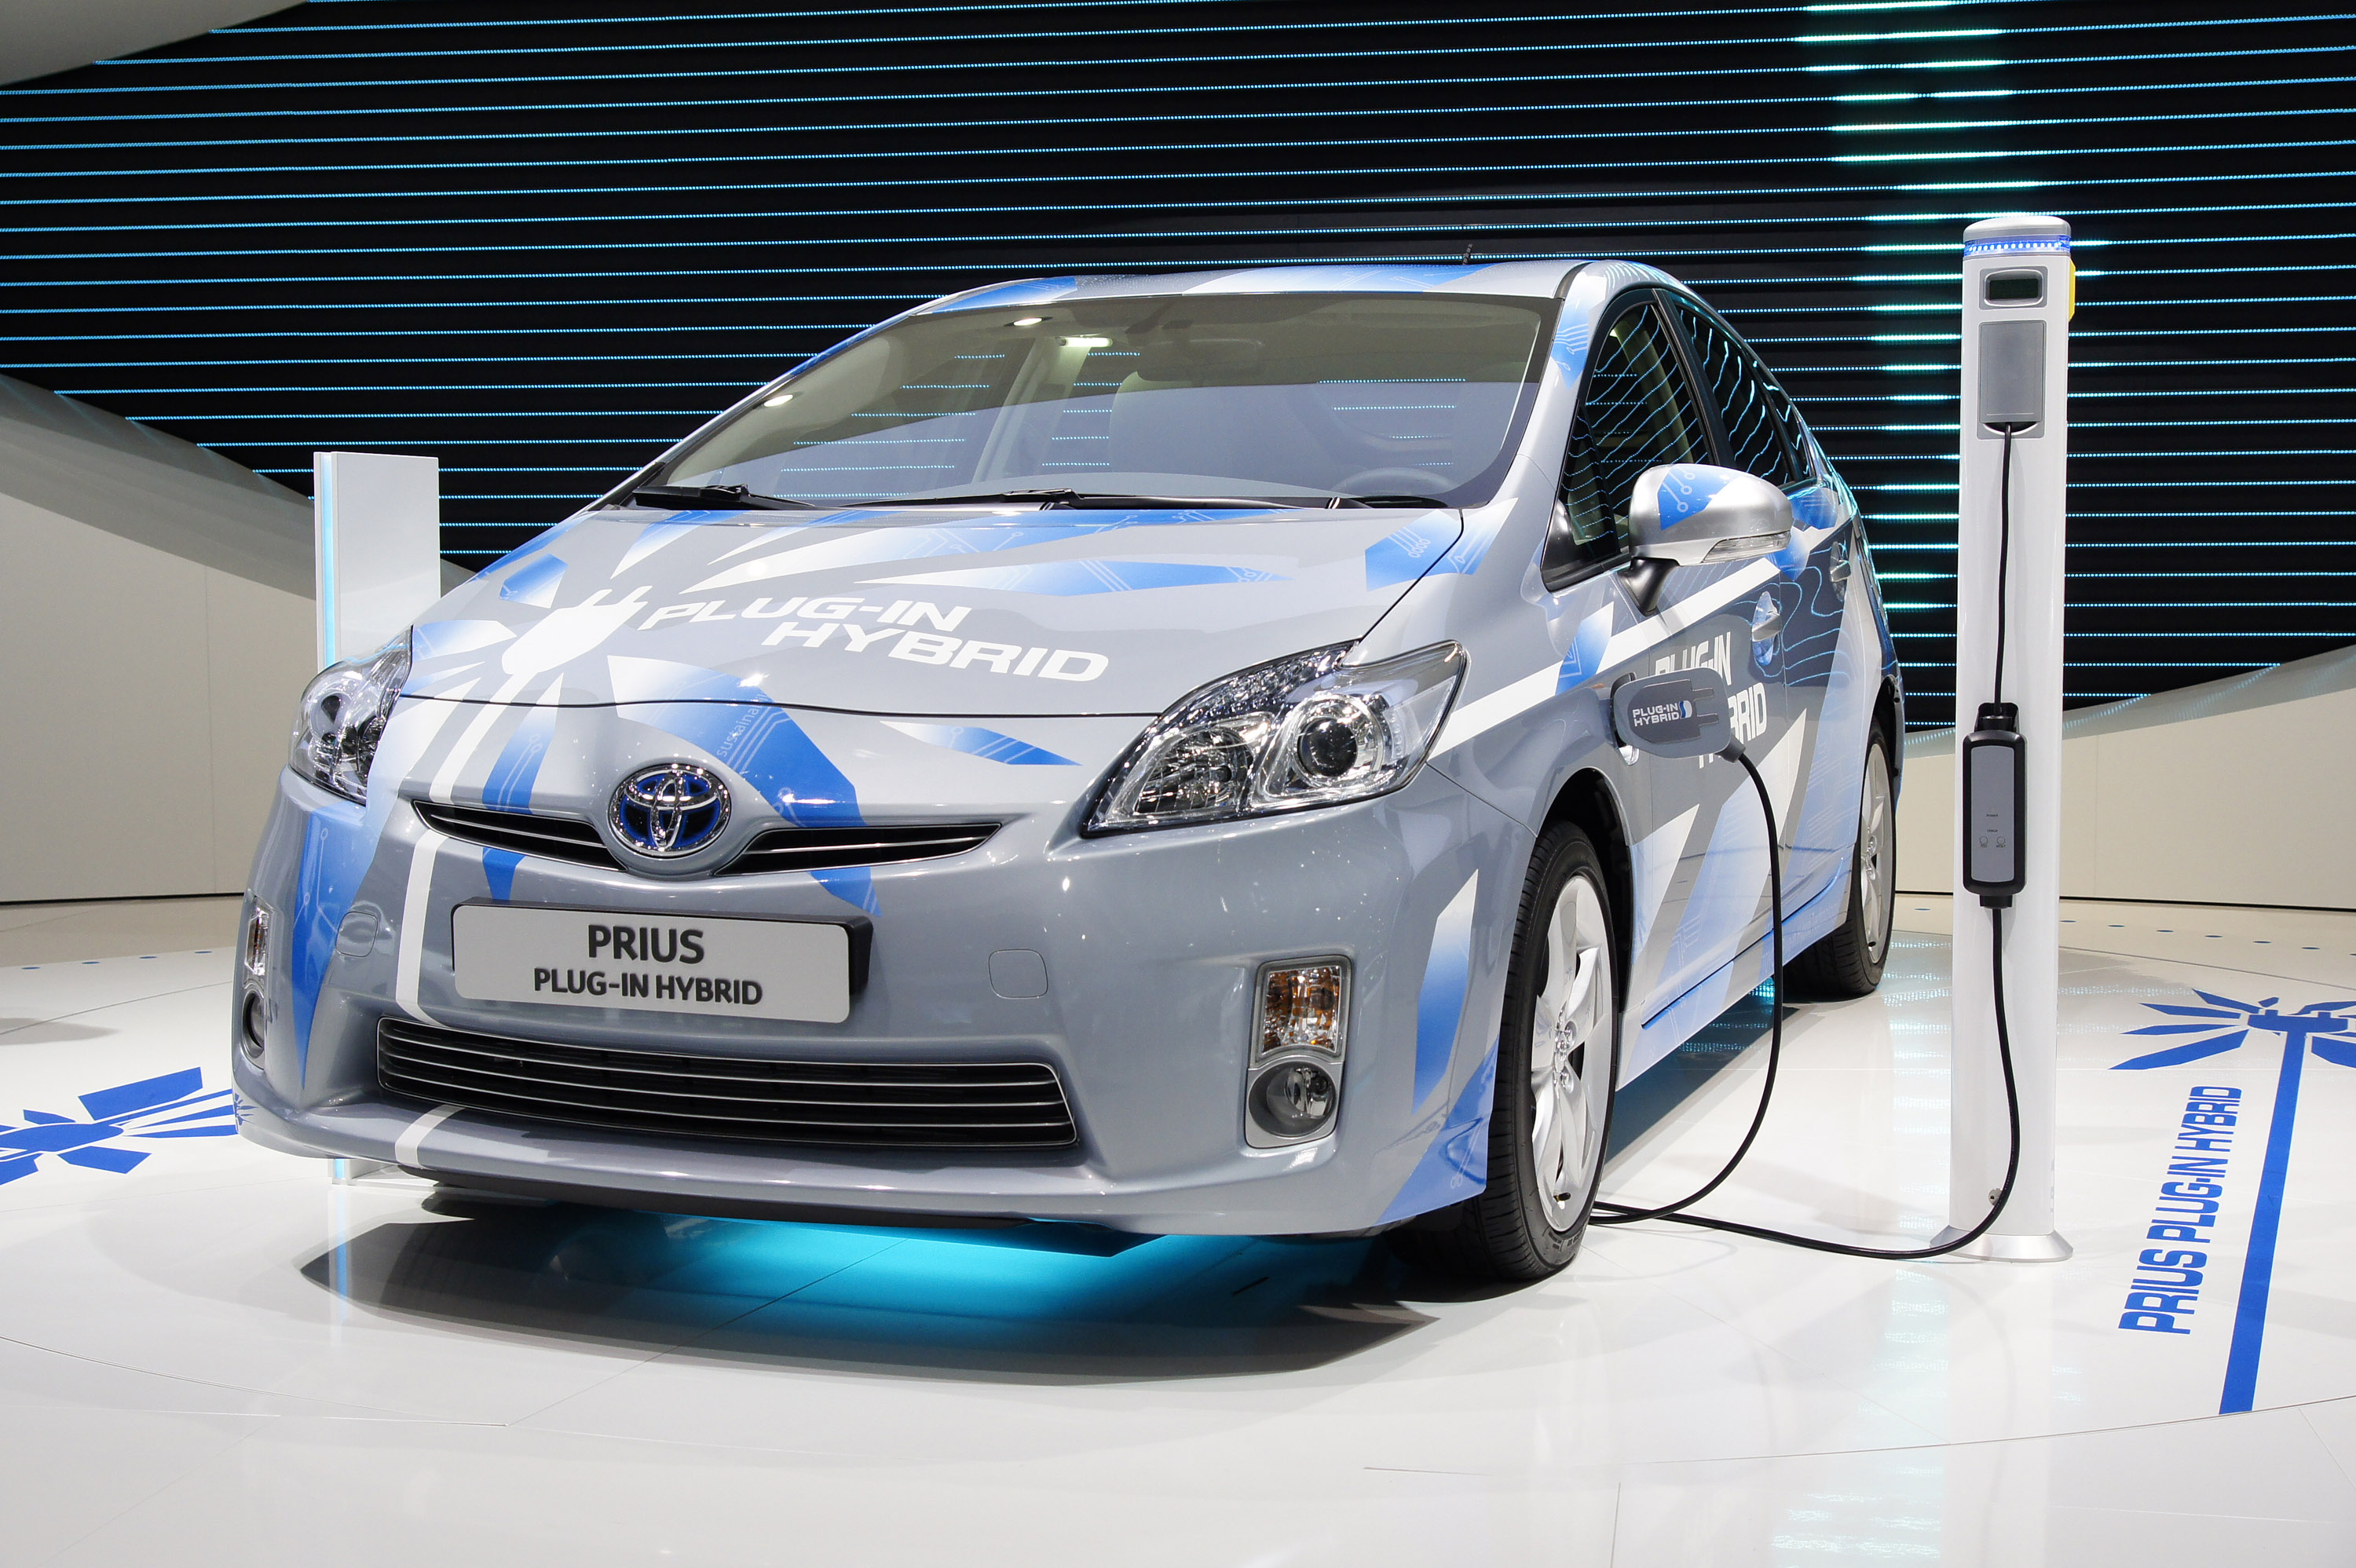 Are Hybrid Vehicles More Expensive To Maintain